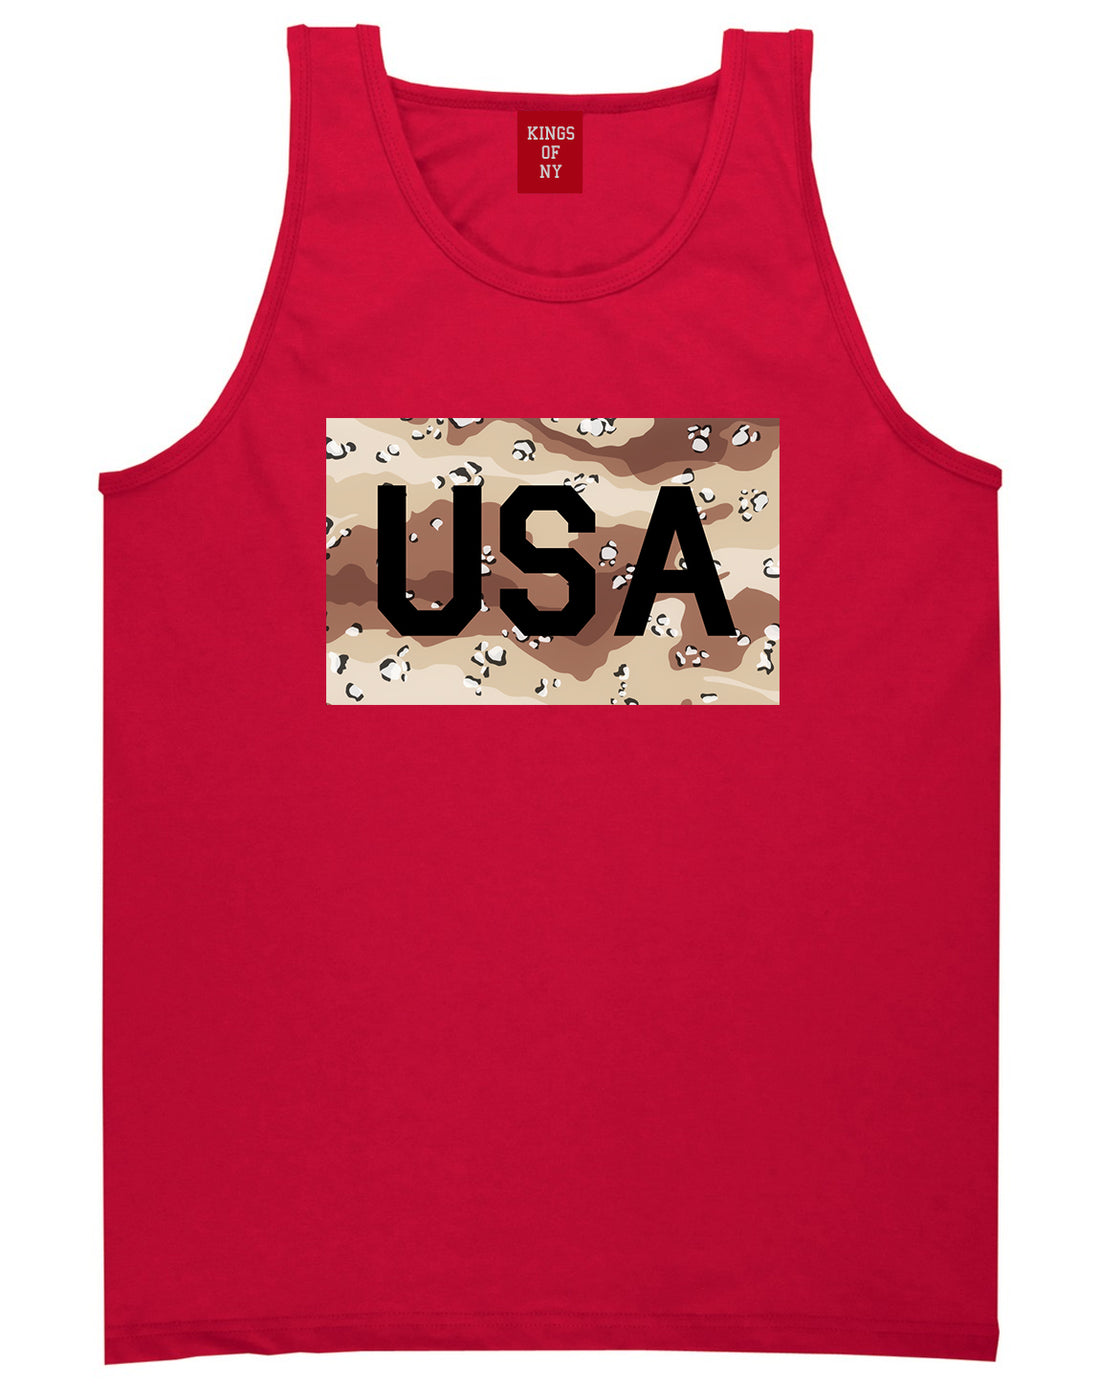 USA_Desert_Camo_Army Mens Red Tank Top Shirt by Kings Of NY